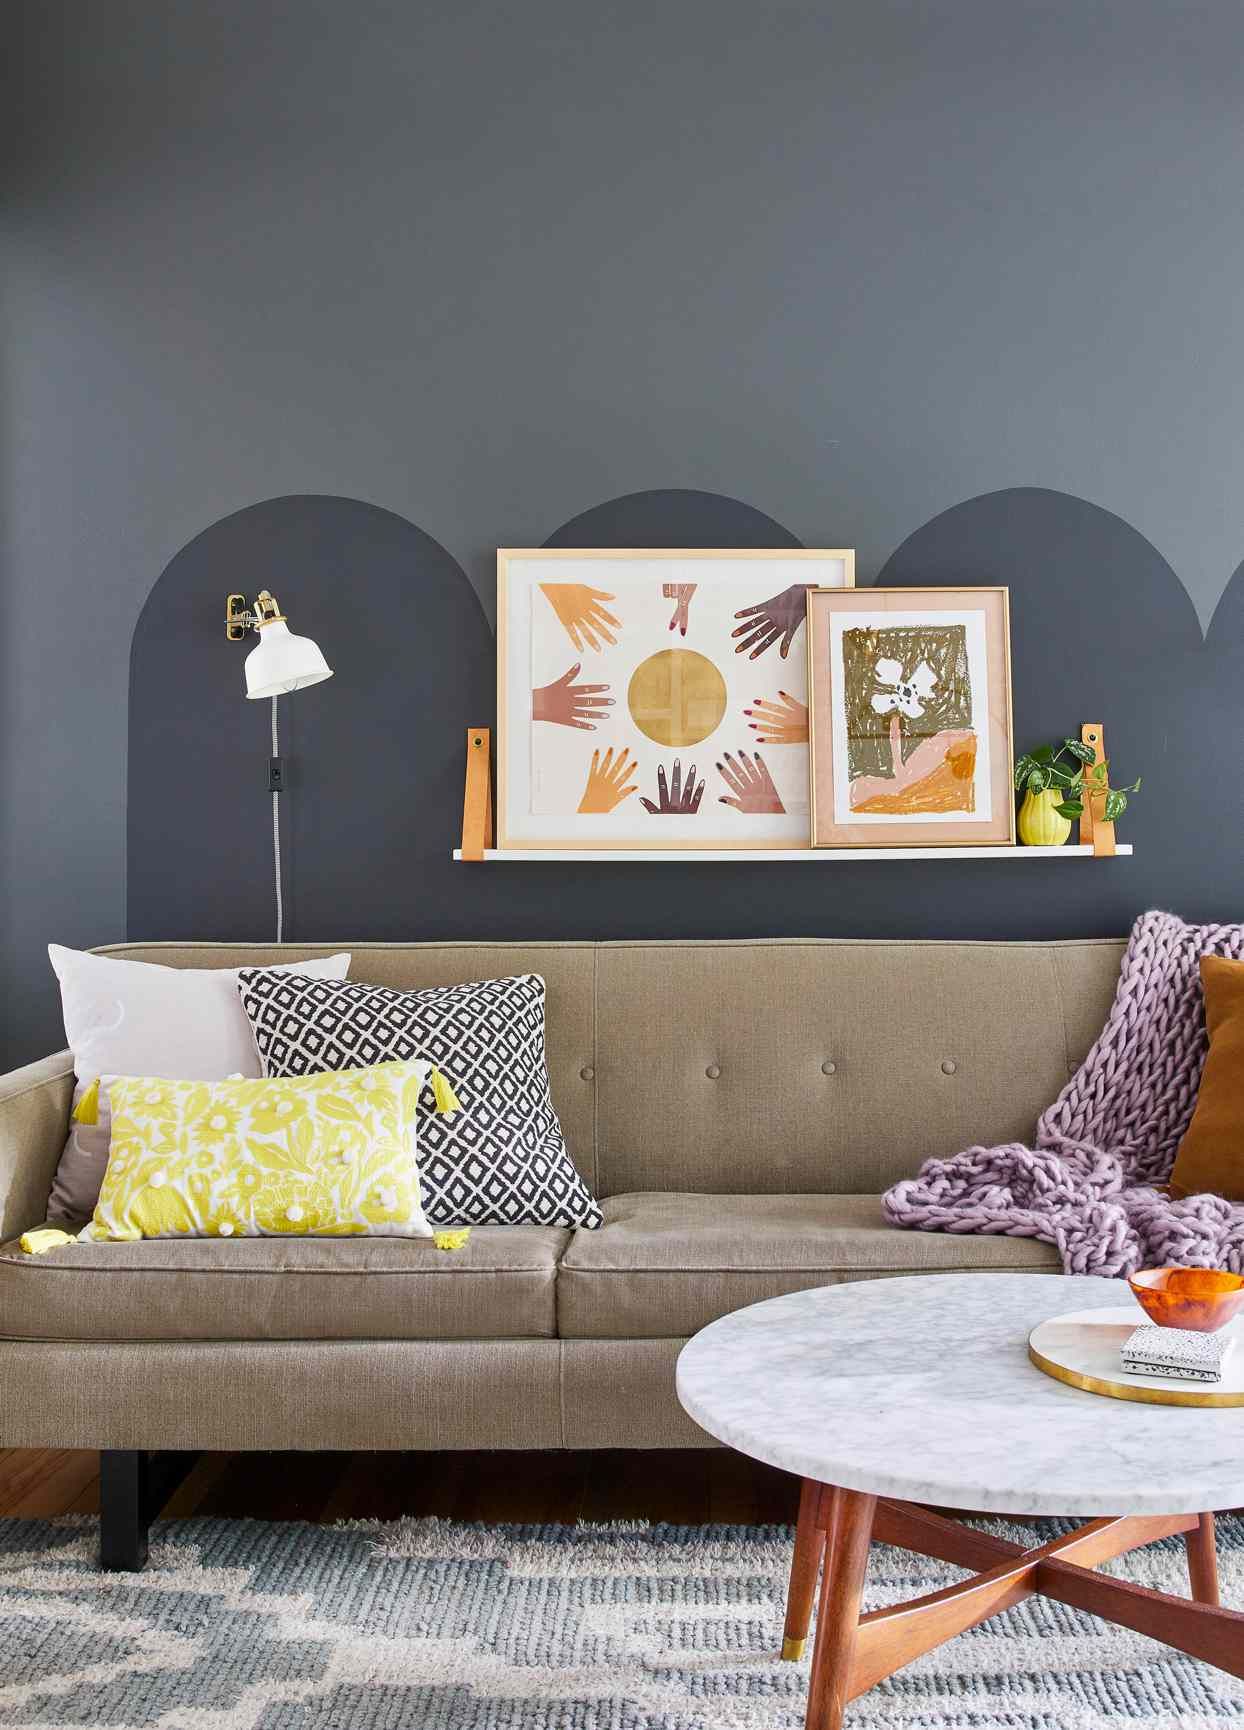 9 Creative Ways To Add Color Block Walls To Your Interior Design Regarding Newest Color Block Wall Art (View 12 of 20)